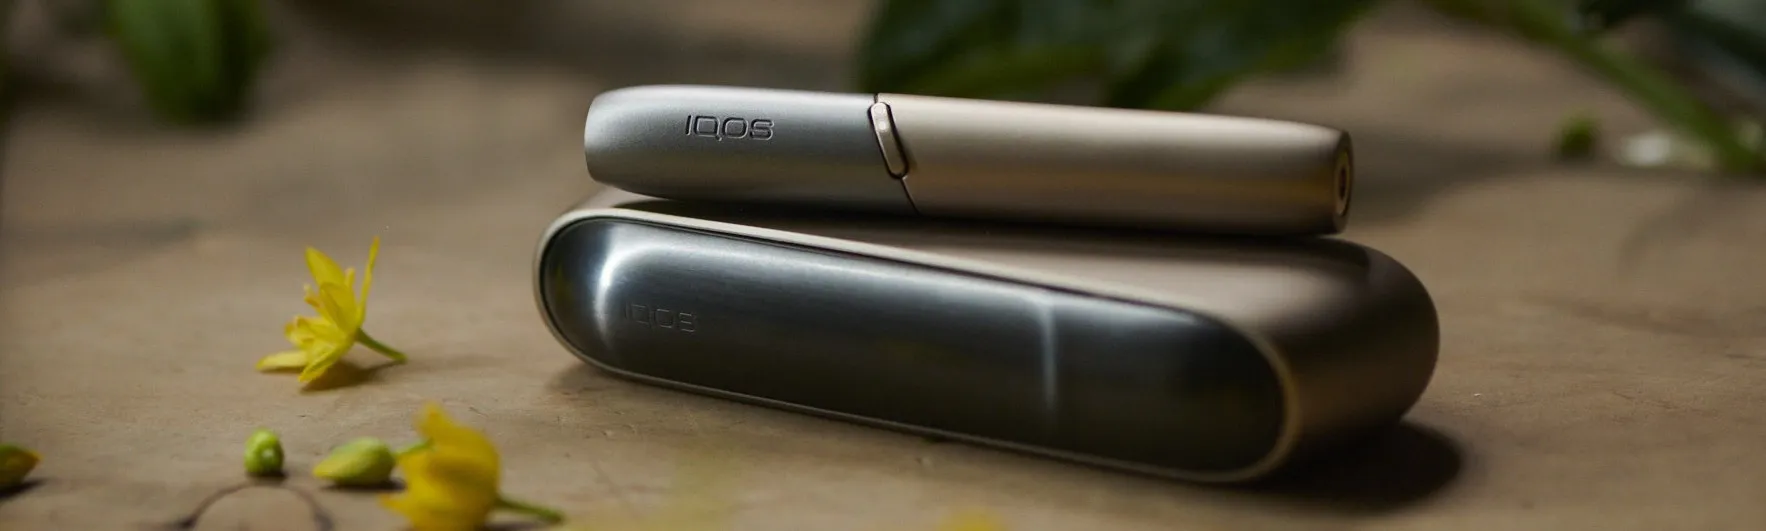 The basic difference between IQOS Heets and Vape devices